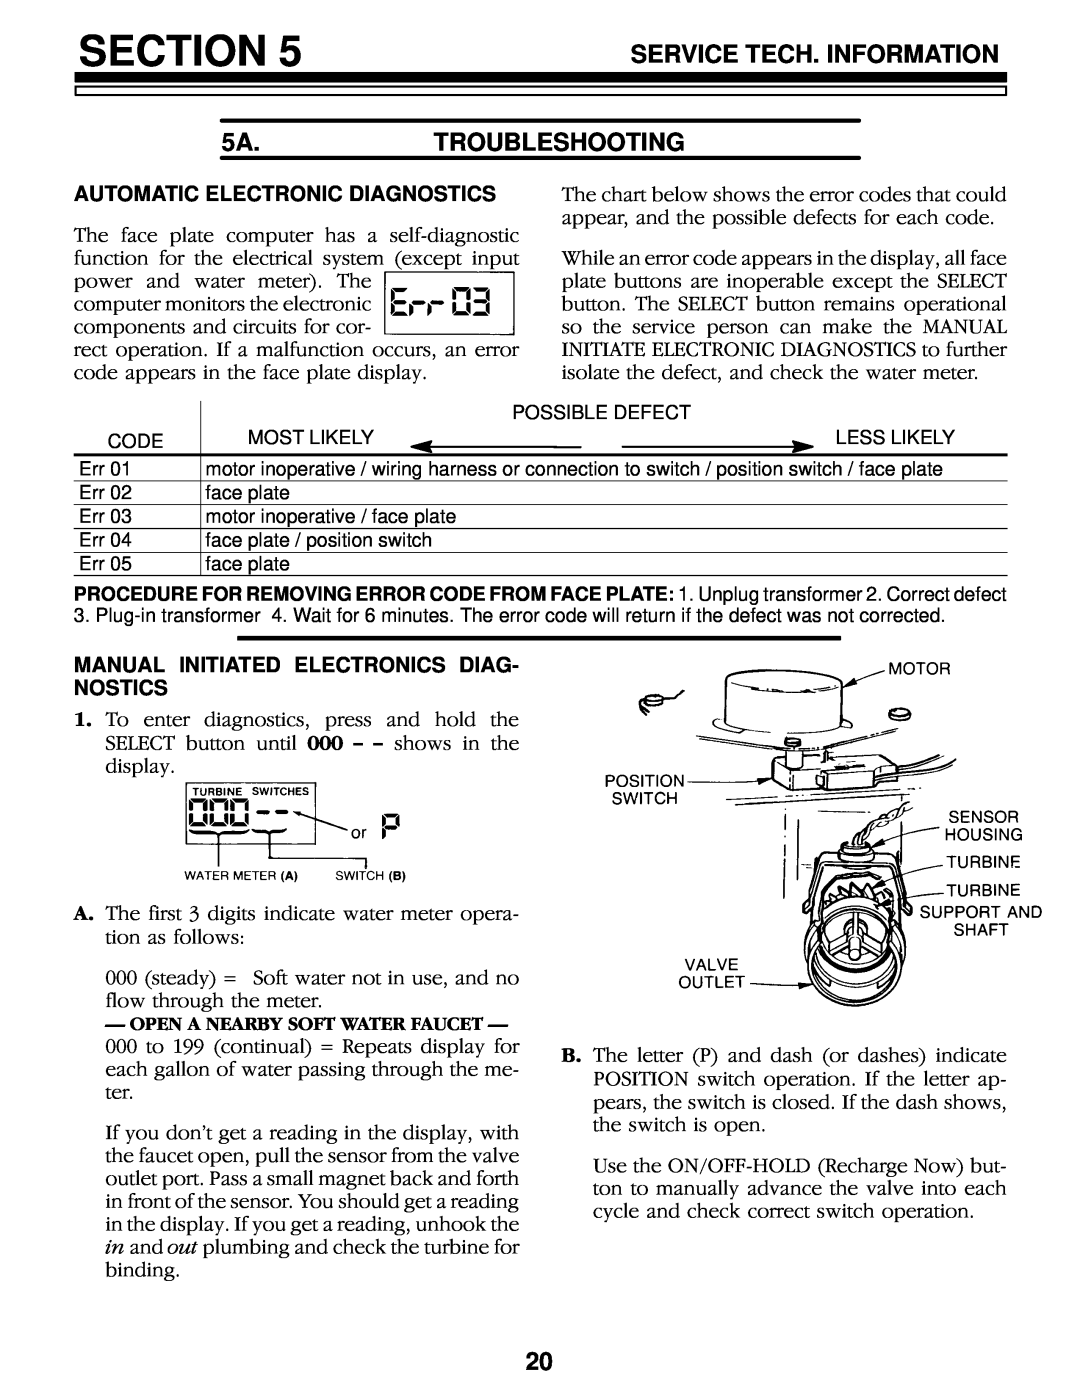 Kenmore 625.348460 owner manual Section, Service Tech. Information, 5A.TROUBLESHOOTING, Automatic Electronic Diagnostics 